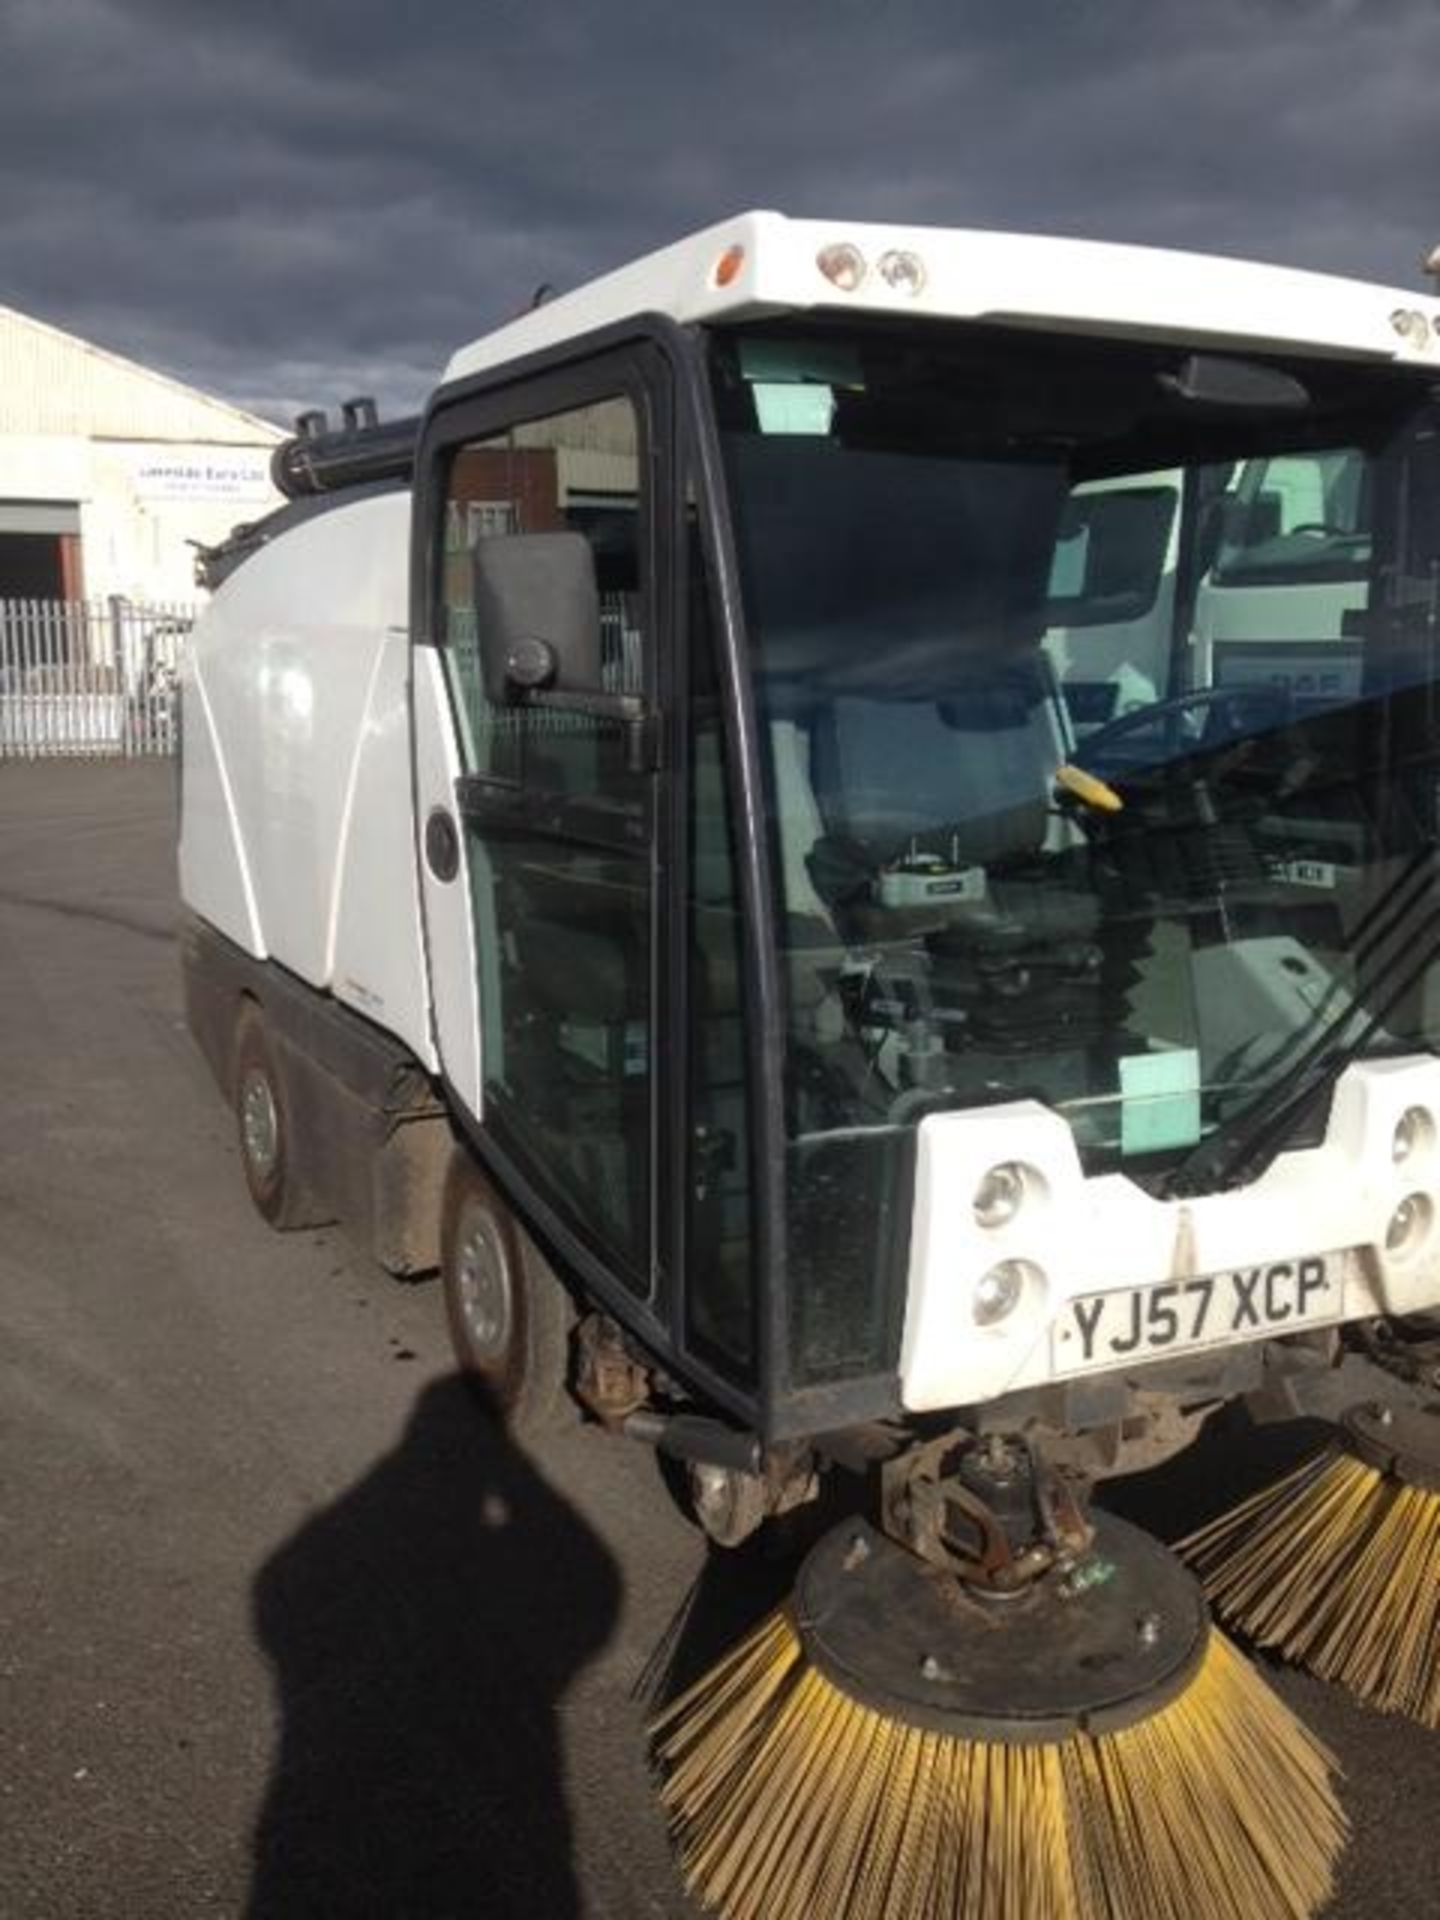 JOHNSTON COMPACT ROAD SWEEPER - Model: CX200 - Date in Service: Nov 2007 - Reg: YJ57 XCP - Hours: 82